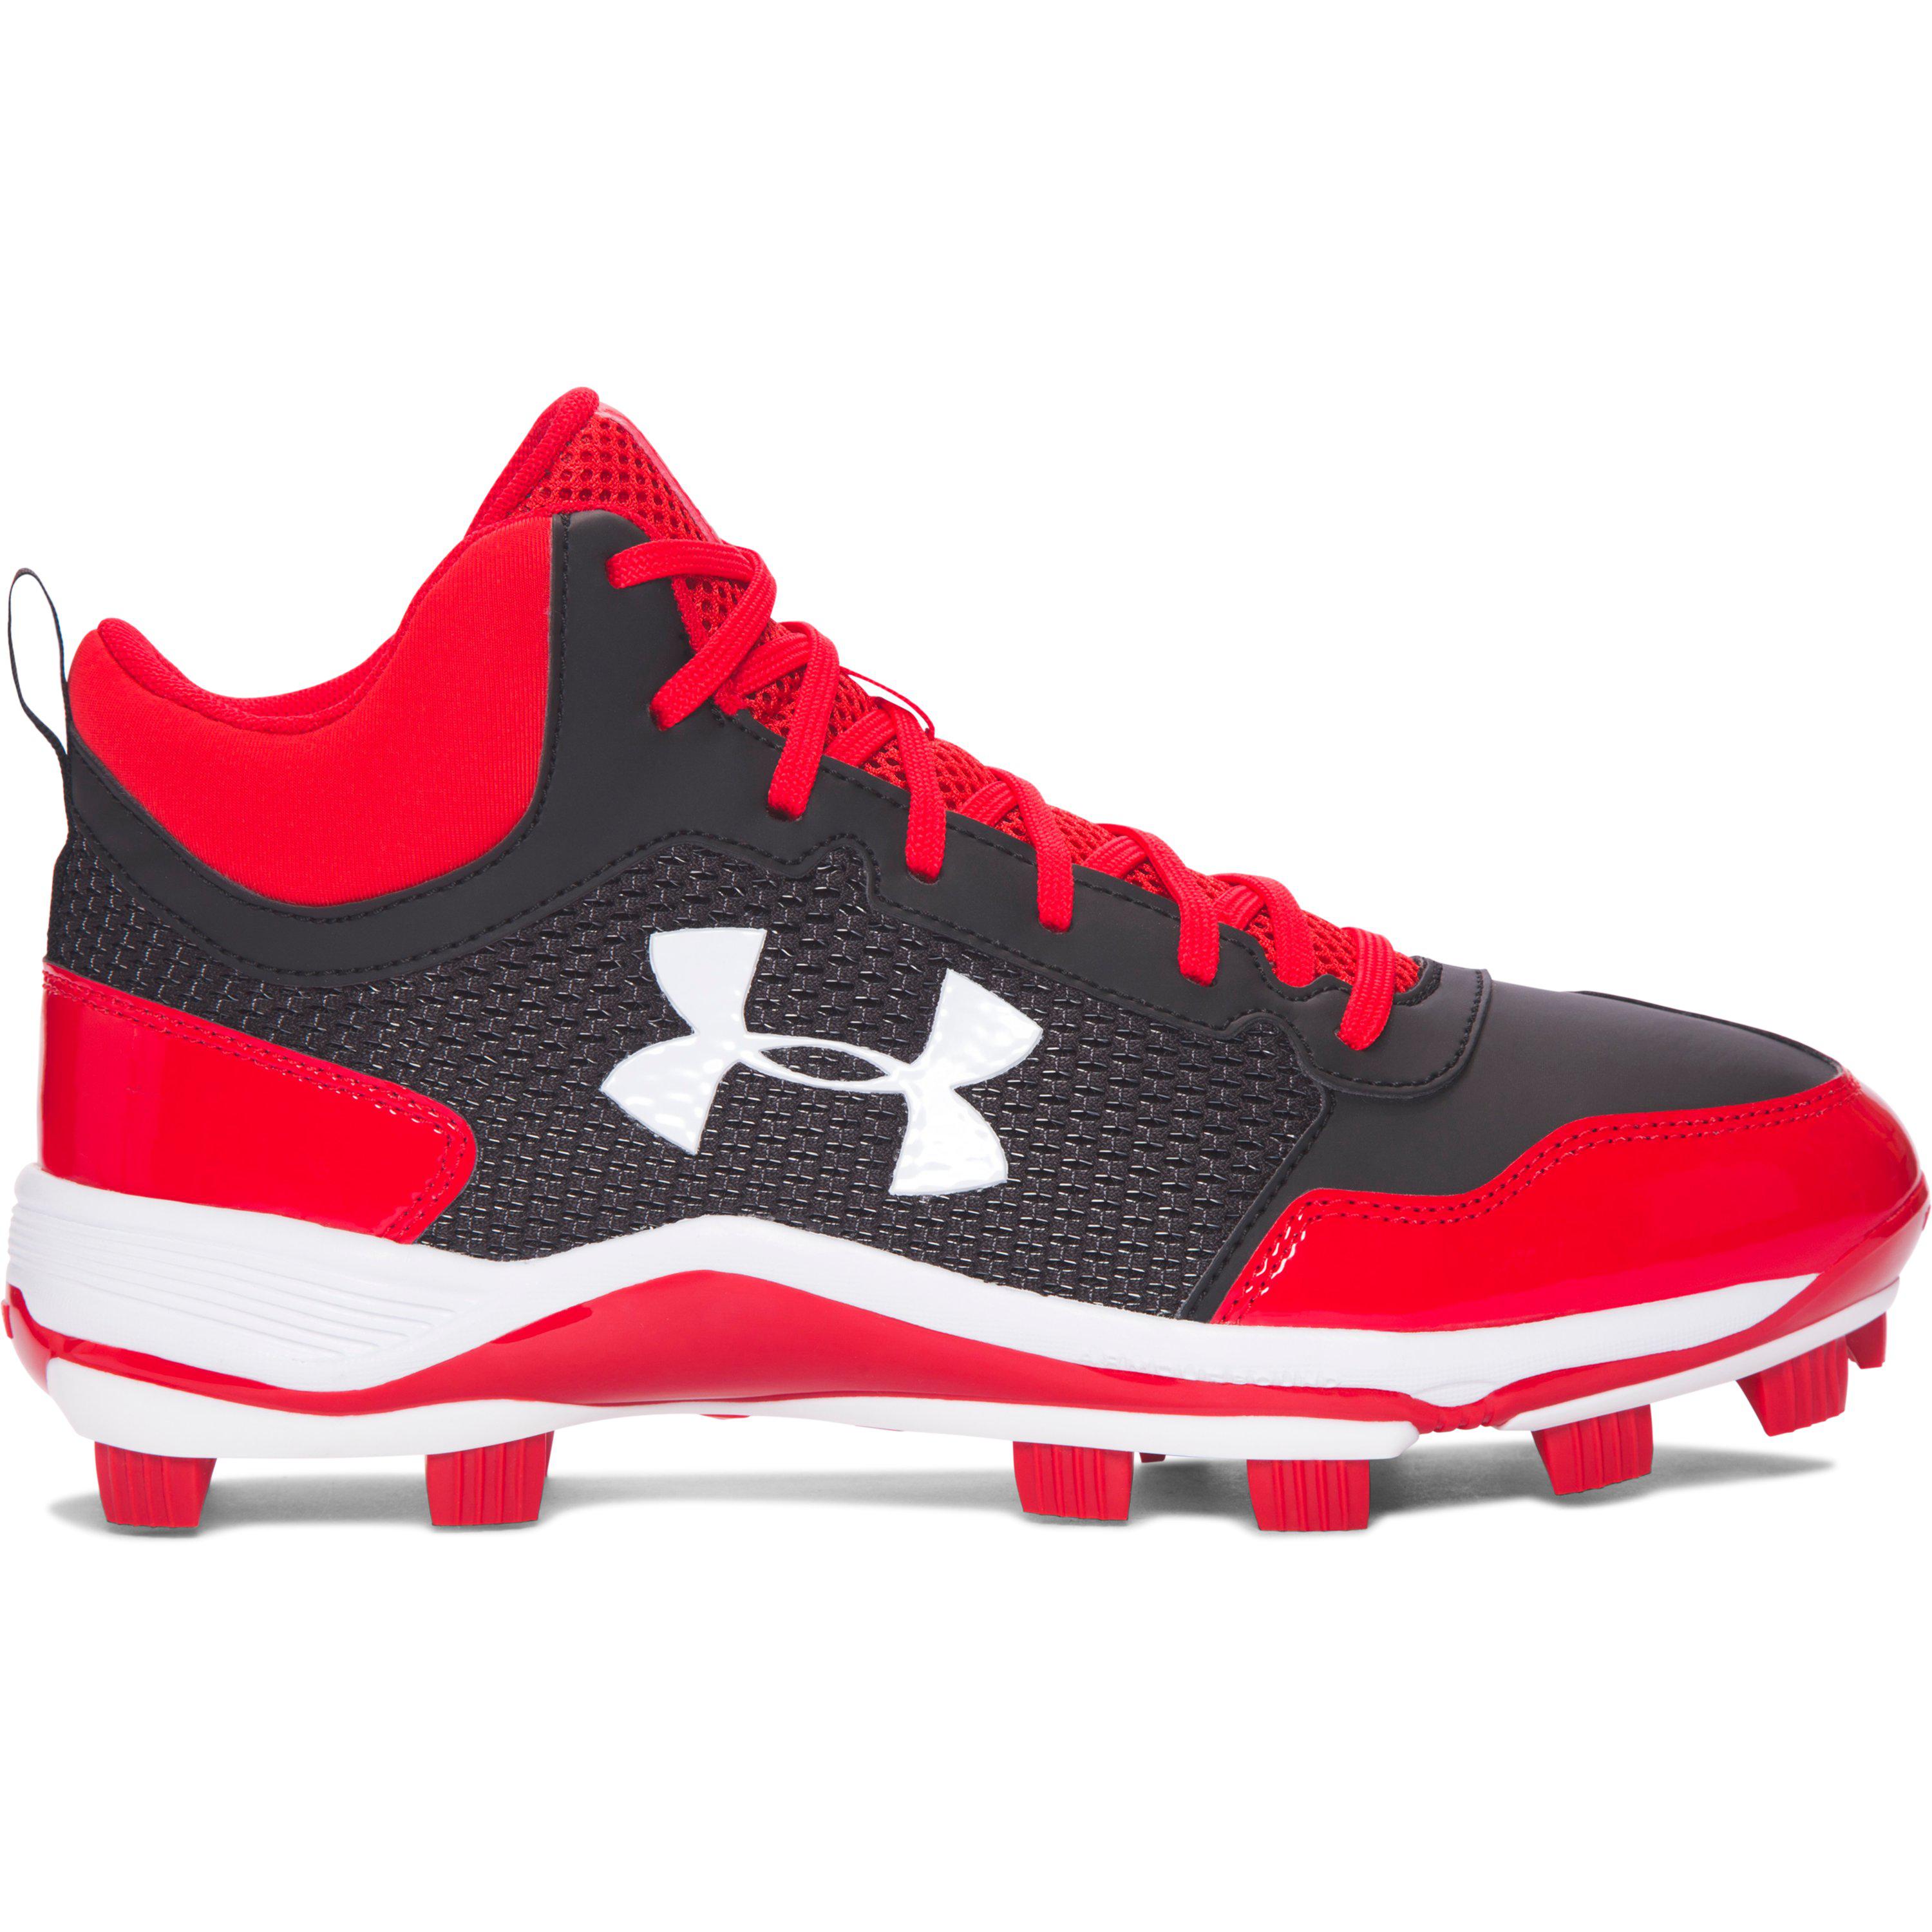 Size 9.5 1274396-611 Under Armour Mens Spine Heater Mid TPU Baseball Cleats 